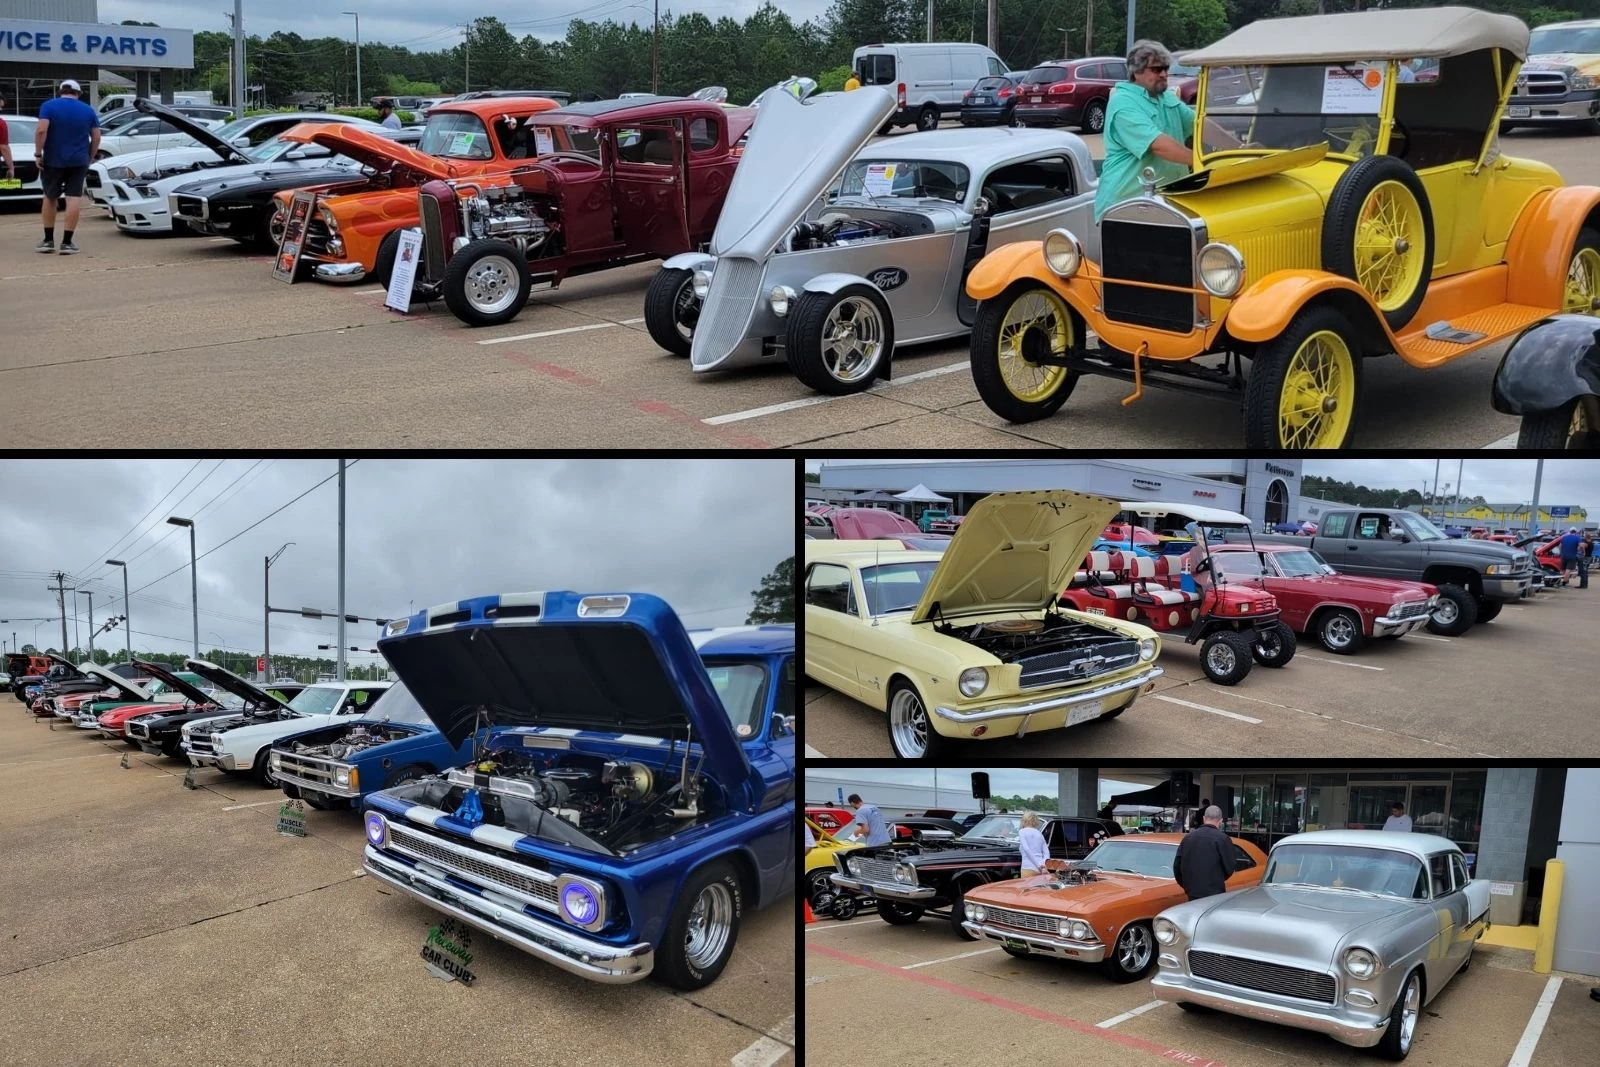 Hit the Bricks, Big Car Show in Tyler, Texas This Weekend